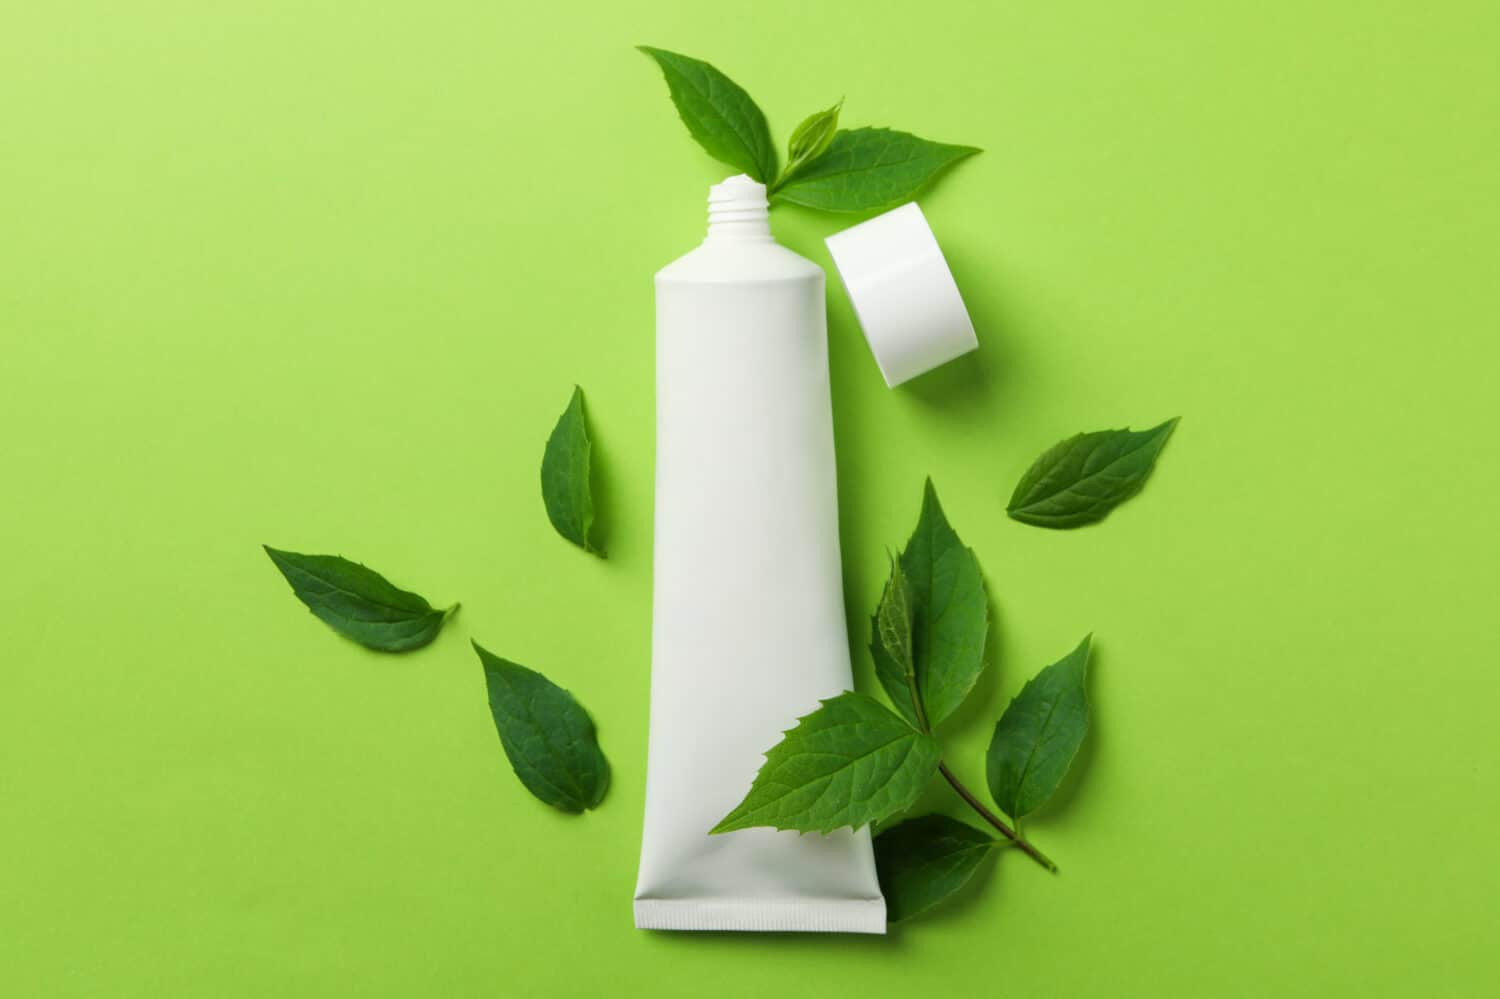 Toothpaste tube and mint leaves on green background, space for text